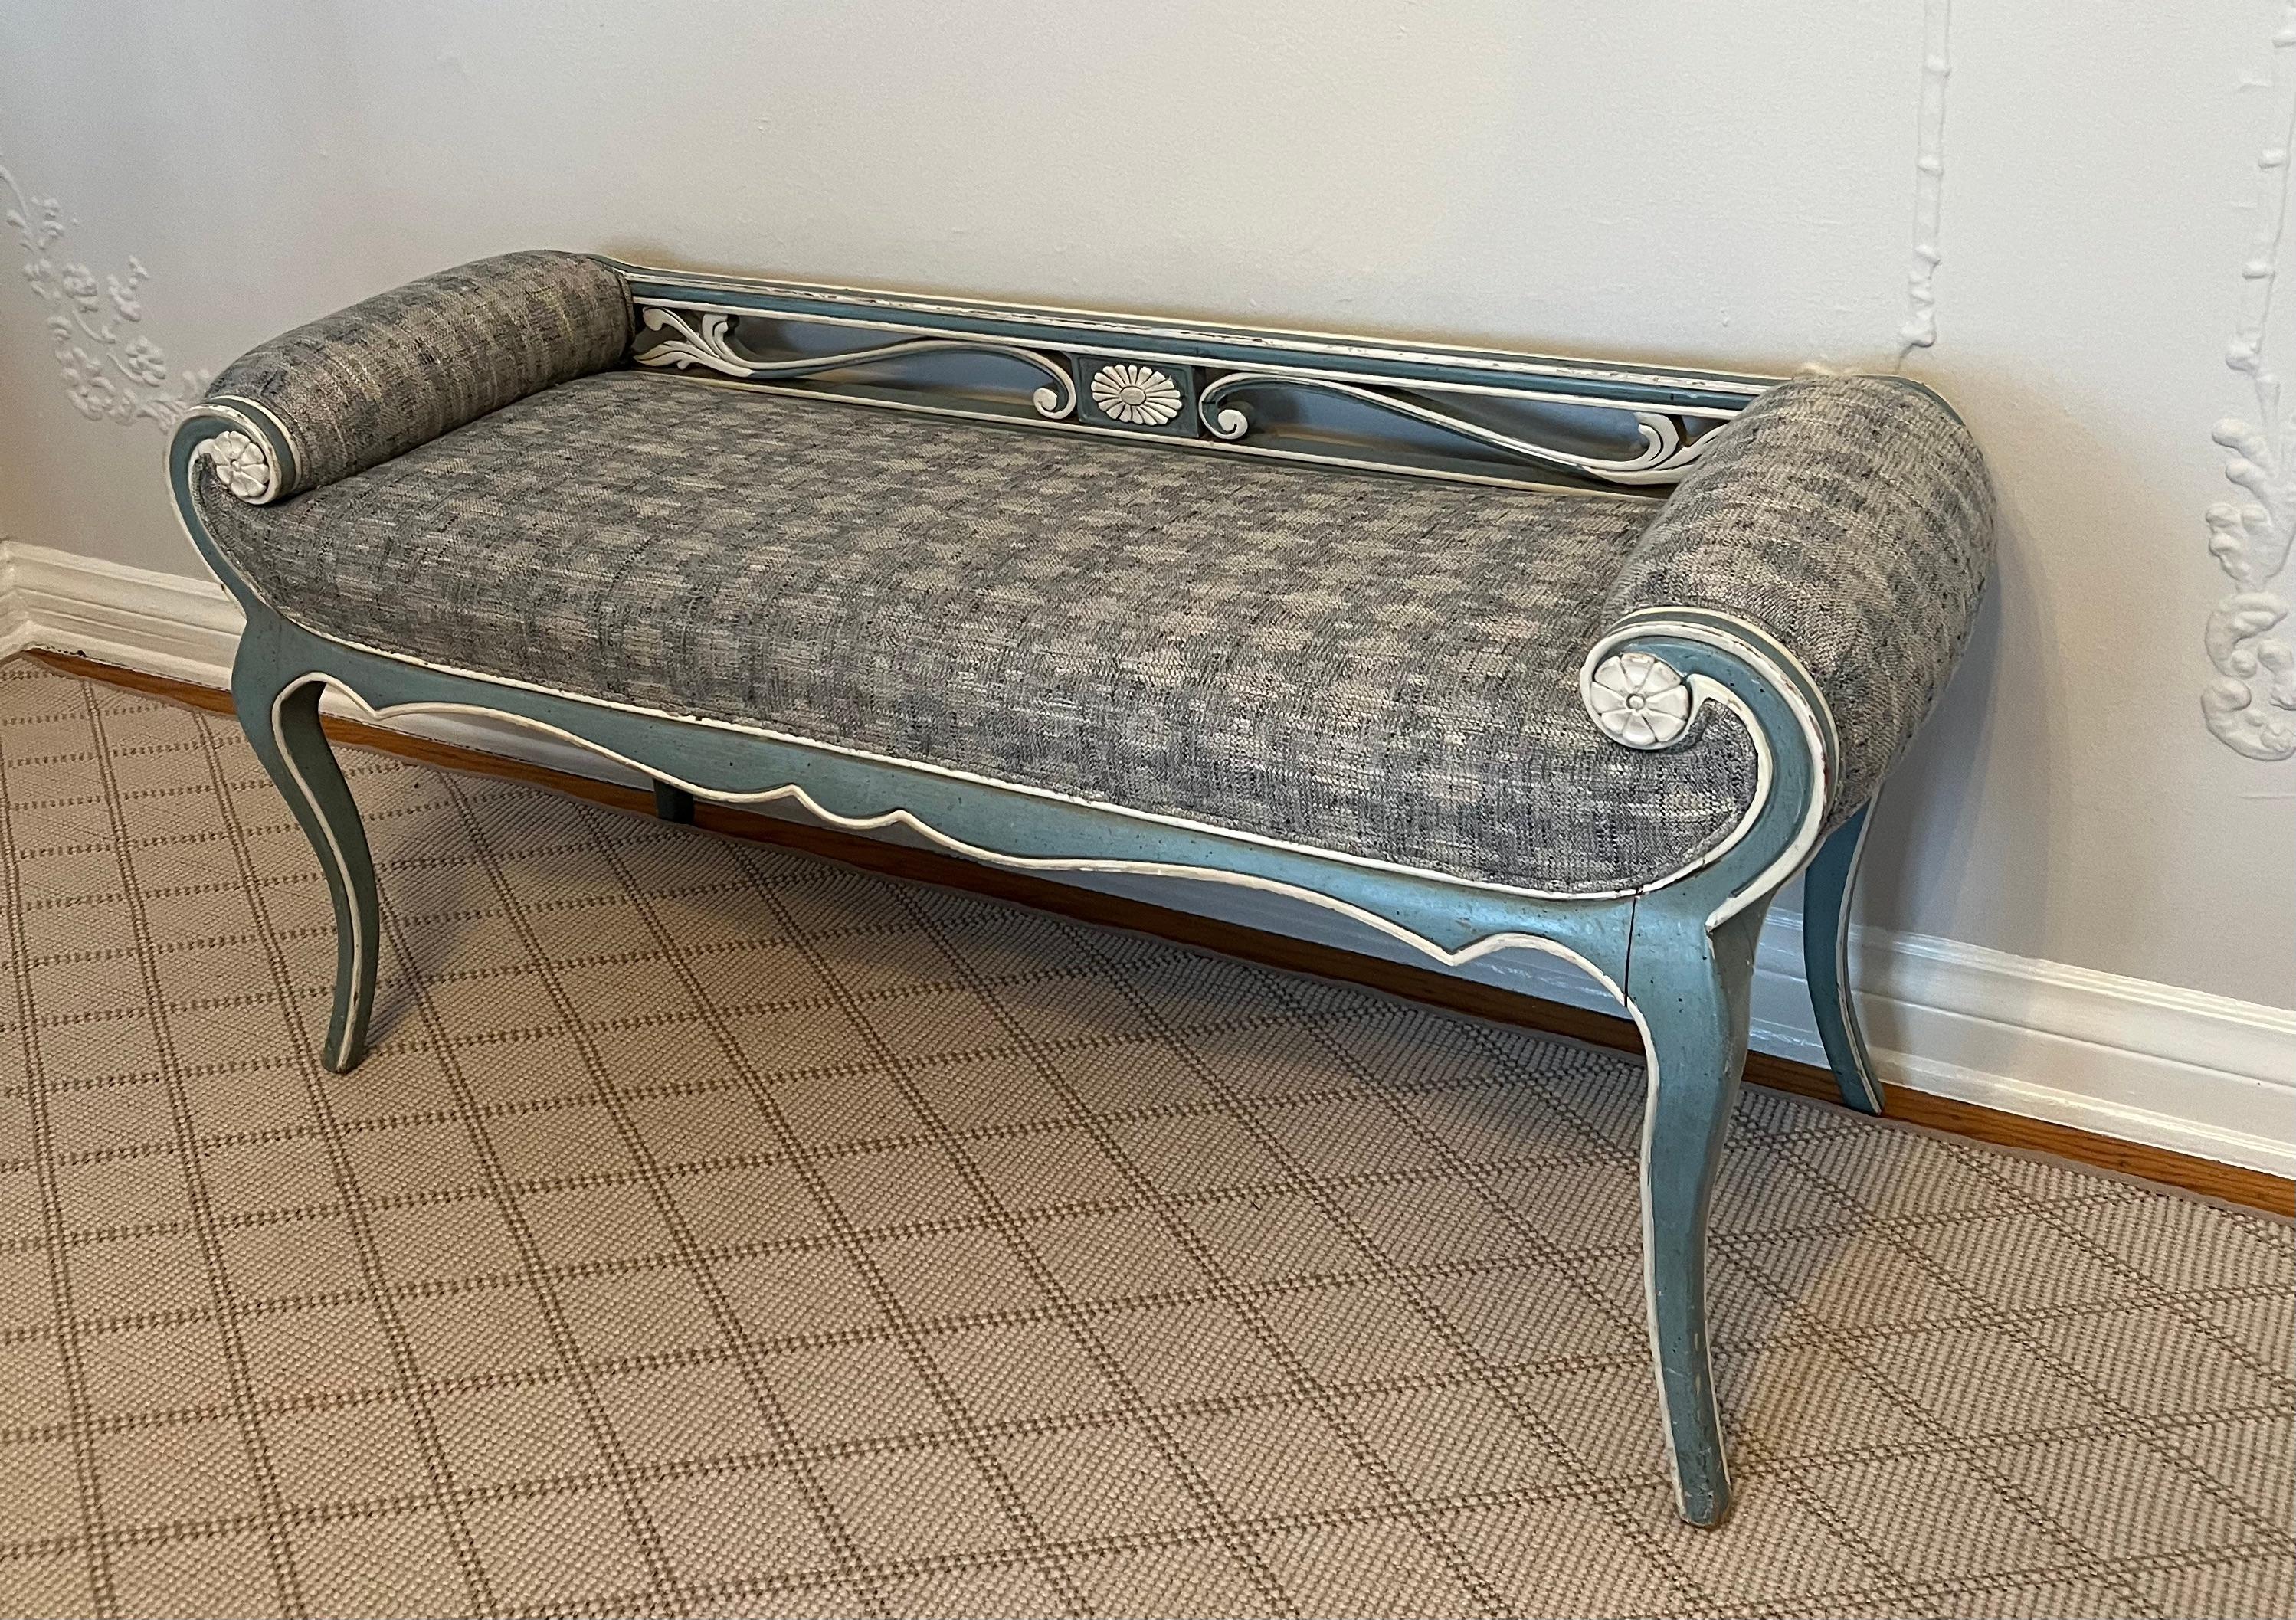 20th Century Swedish Style Bench with Swedish Blue and White Trim Frame and Curved Arms